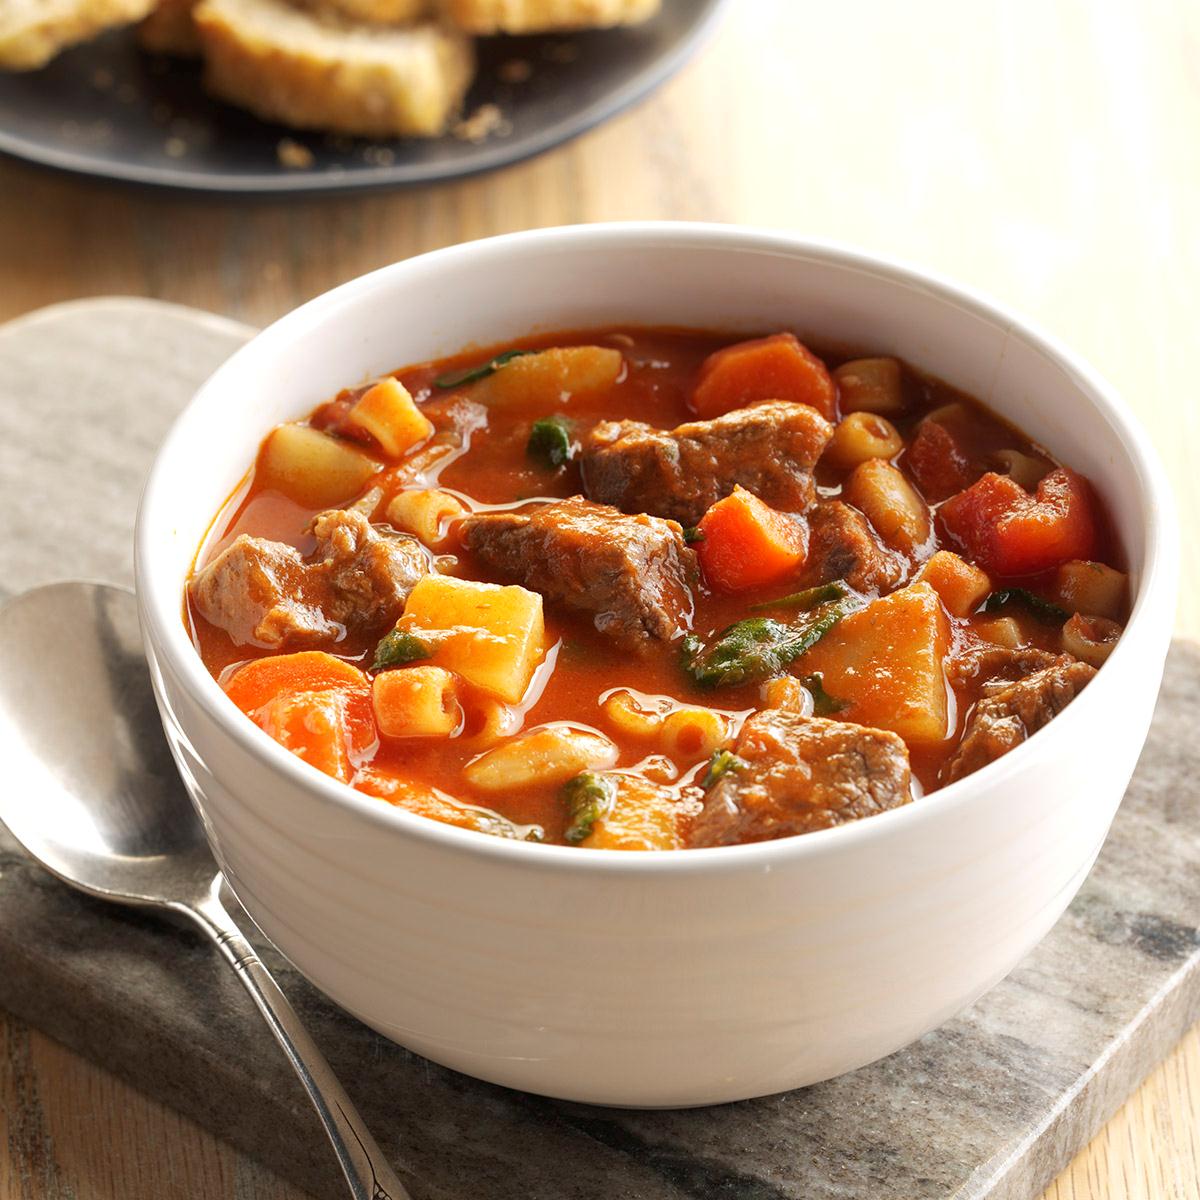 Beef Stew with Pasta image.